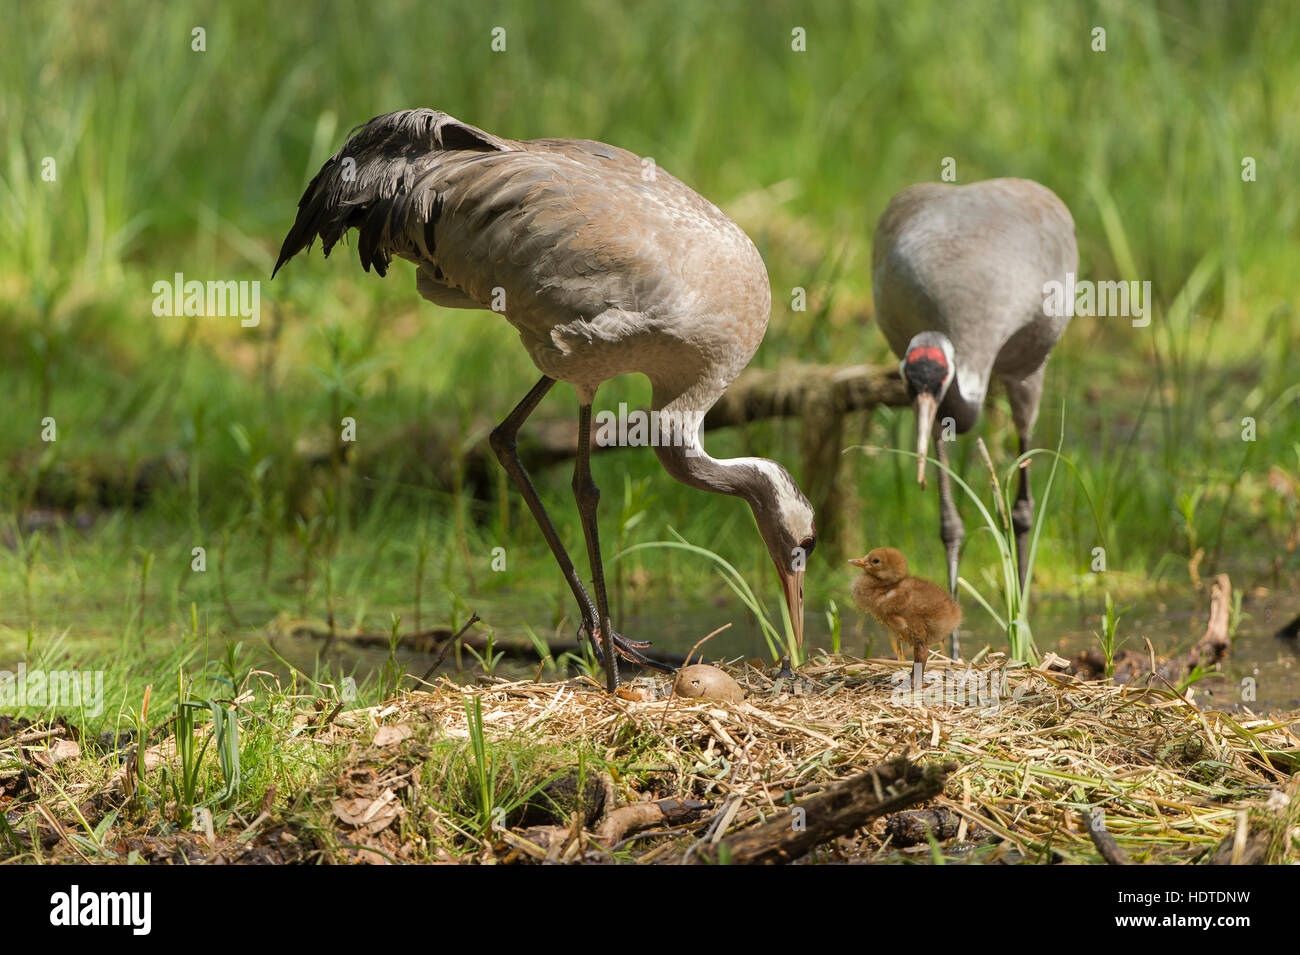 Common or Eurasian cranes (Grus grus), breeding pair at nest with chicks and egg, brooding place, Mecklenburg-Western Pomerania Stock Photo